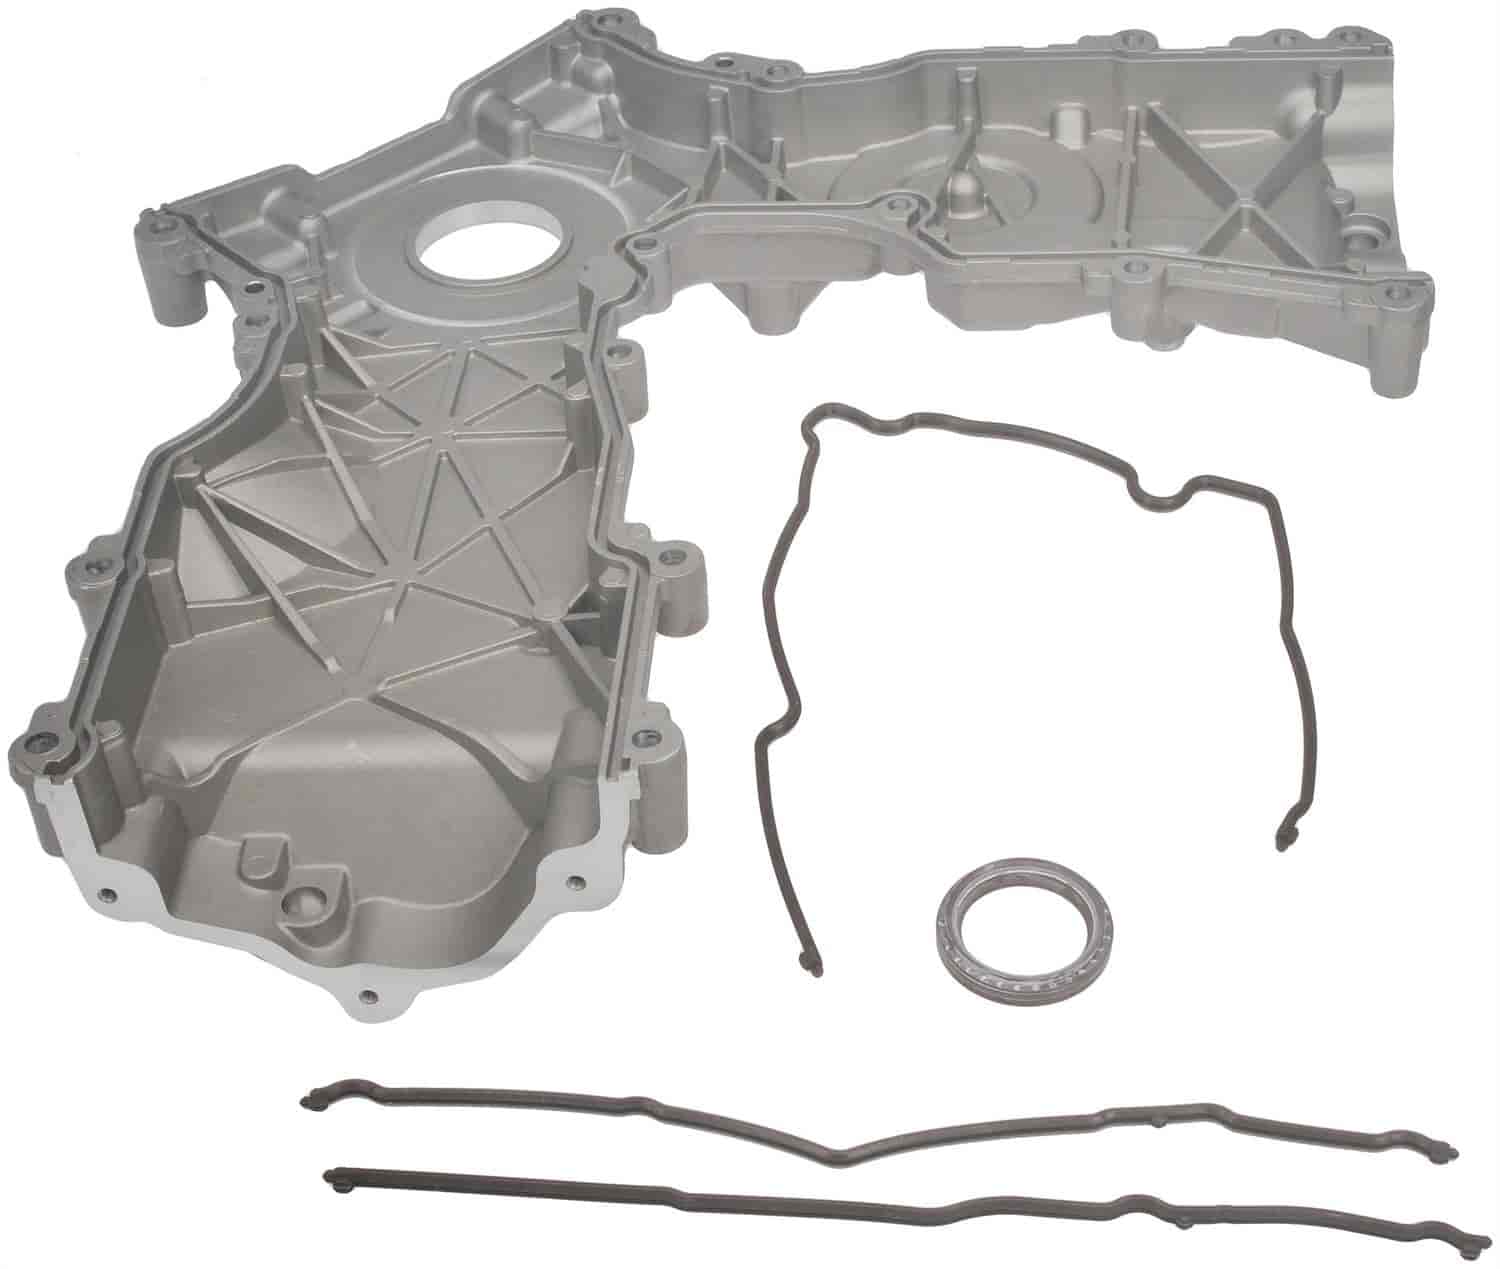 635-129 Timing Cover Kit for Select 2004-2014 Ford